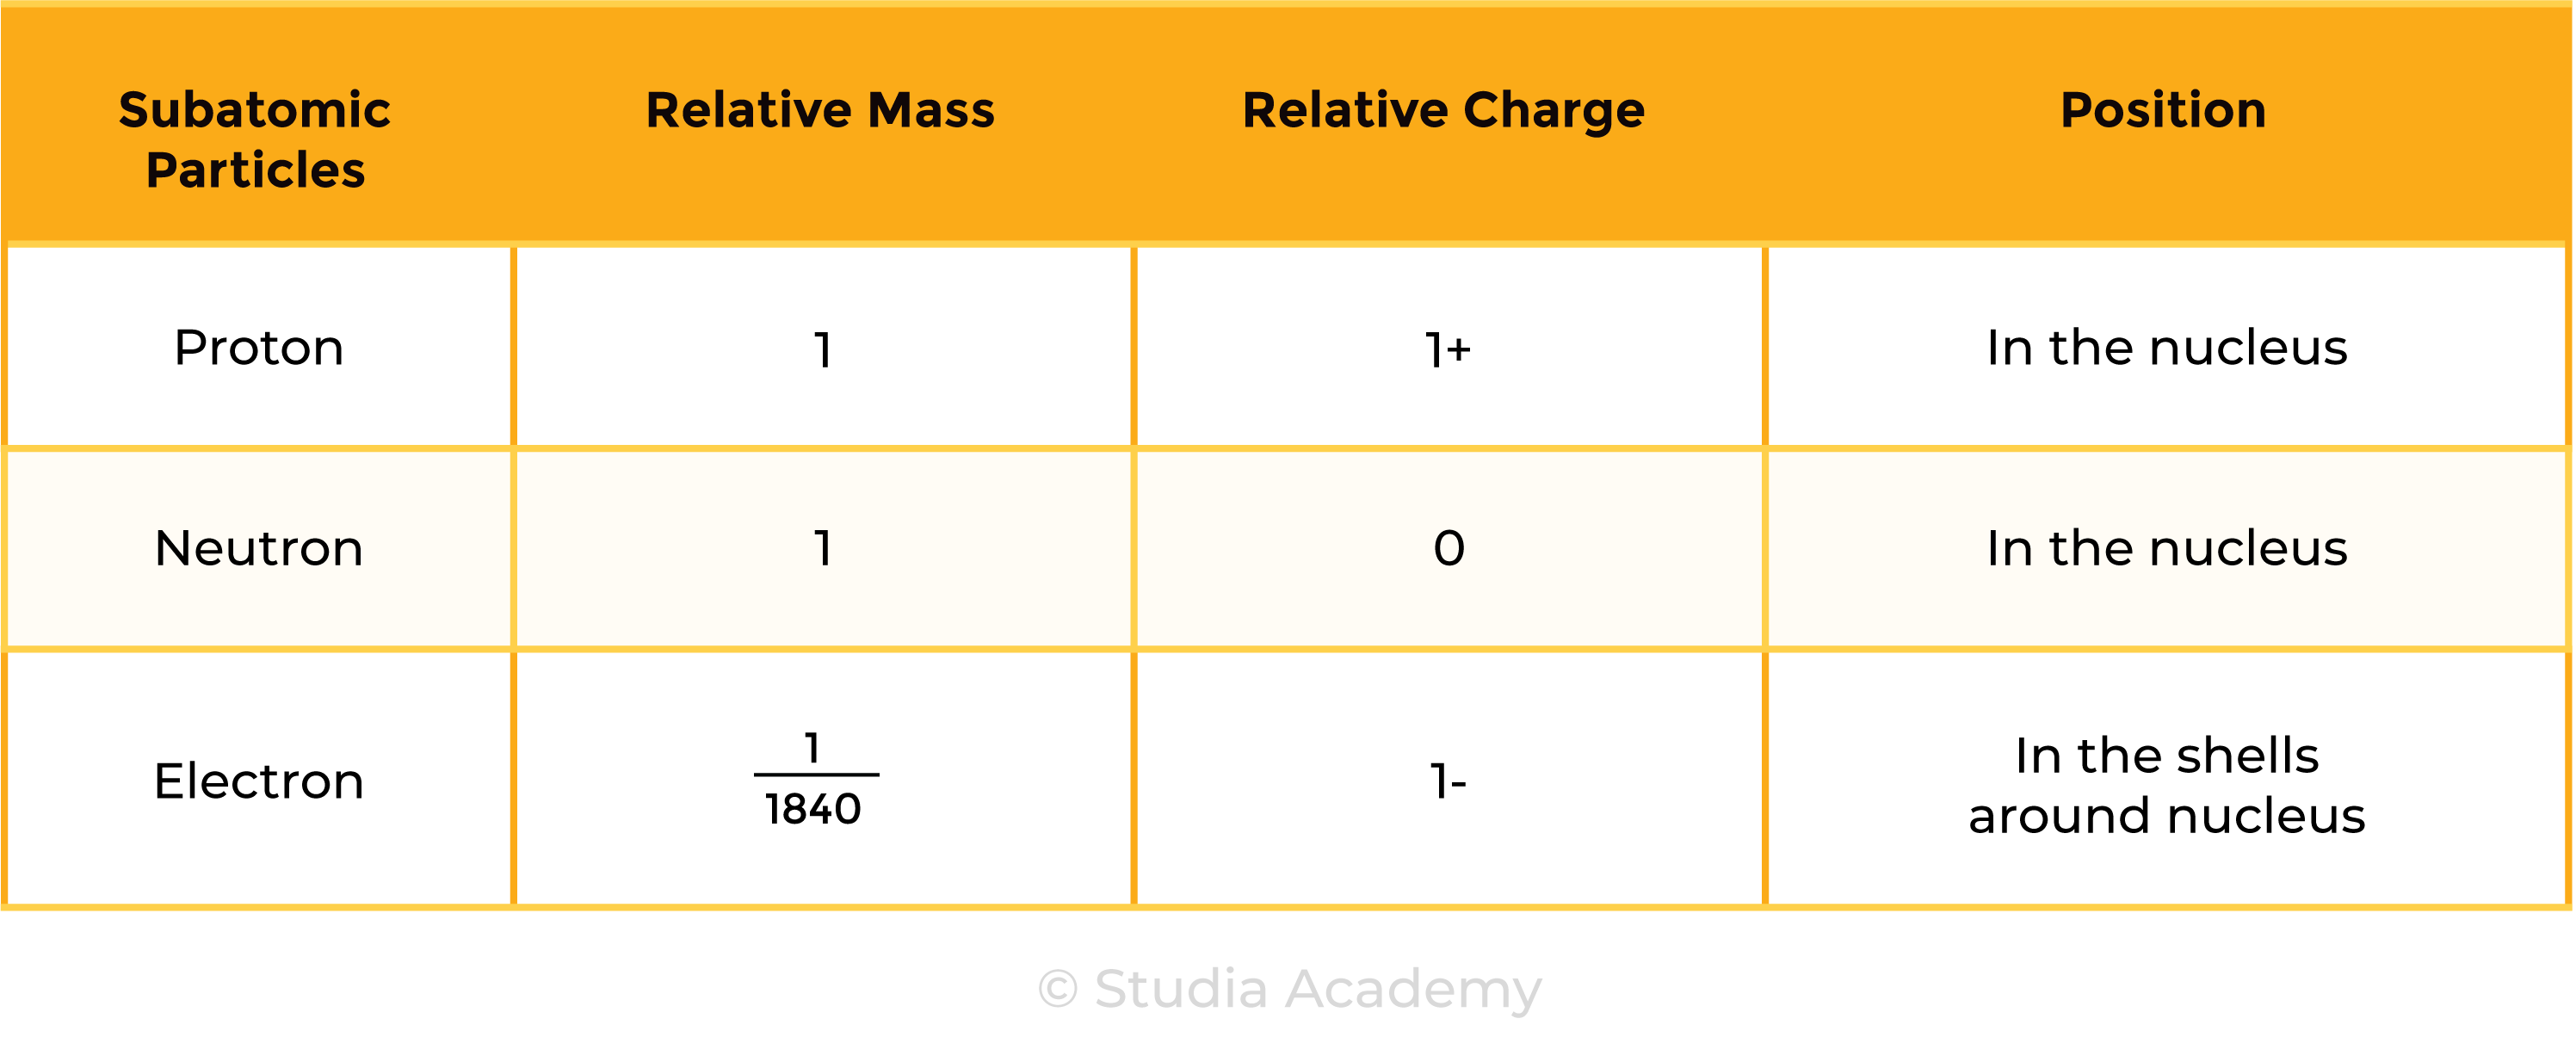 edexcel_igcse_chemistry_topic 03 tables_atomic structure_002_subatomic particles properties